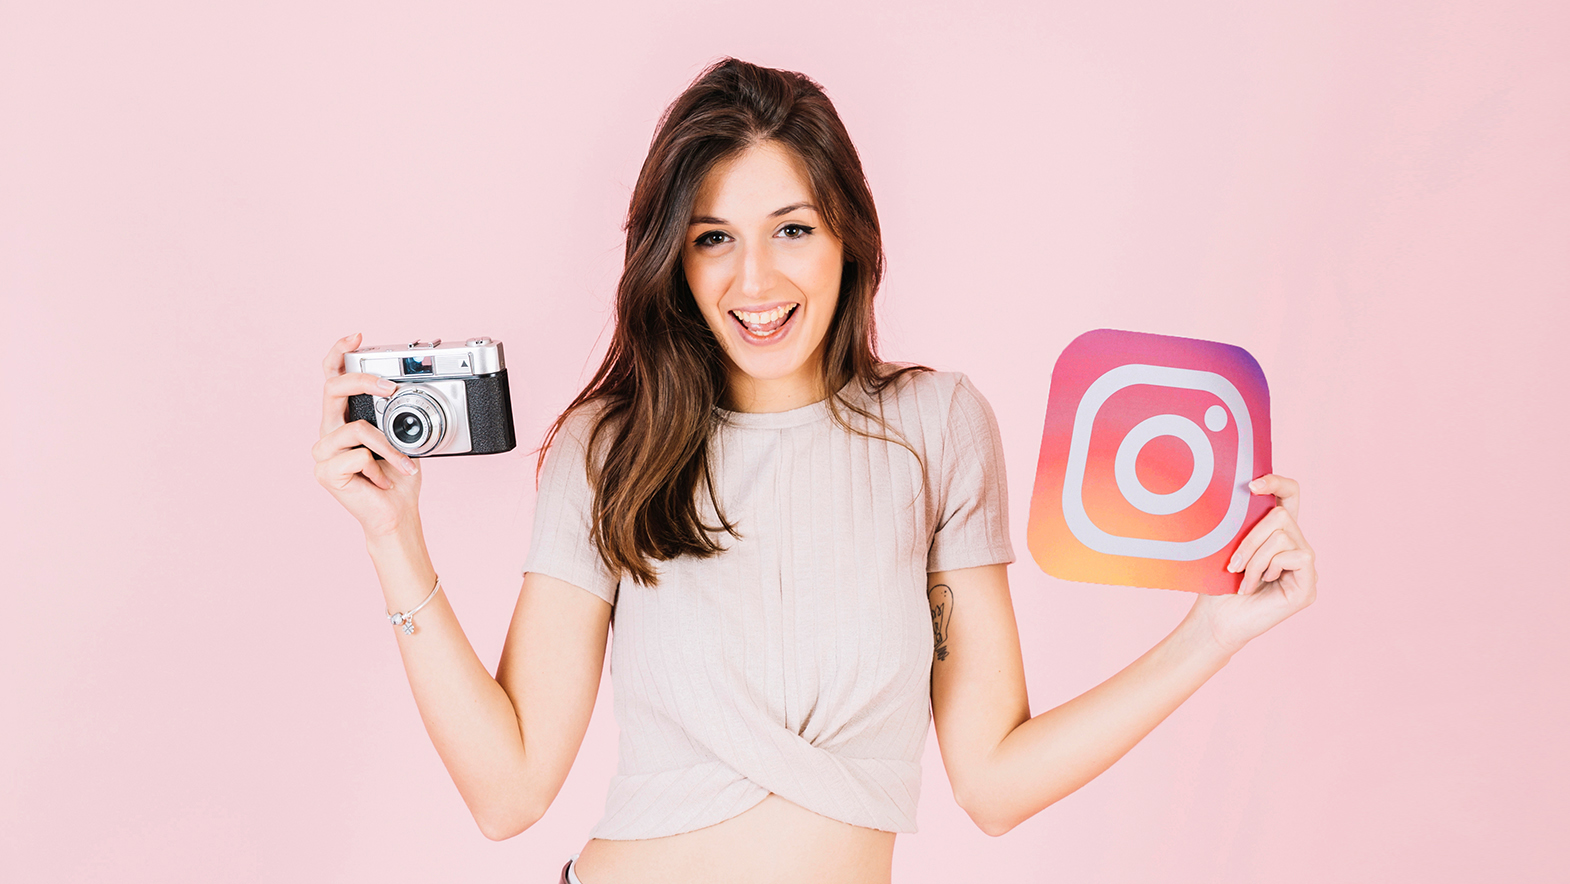 How to Become Instagram Famous & The Steps You Can Take